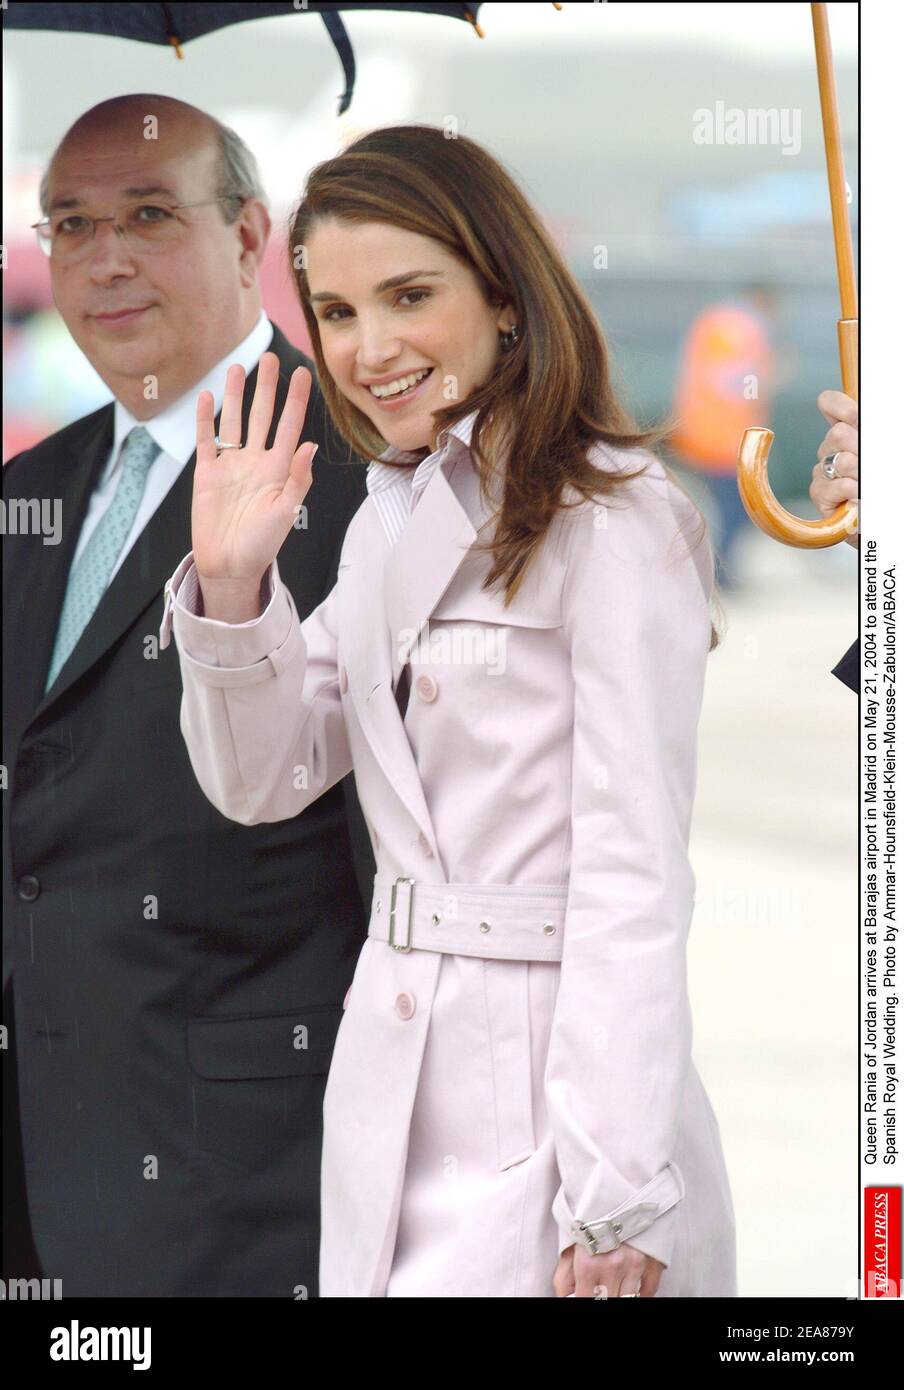 Queen Rania of Jordan arrives at Barajas airport in Madrid on May 21, 2004 to attend the Spanish Royal Wedding. Photo by Ammar-Hounsfield-Klein-Mousse-Zabulon/ABACA. Stock Photo